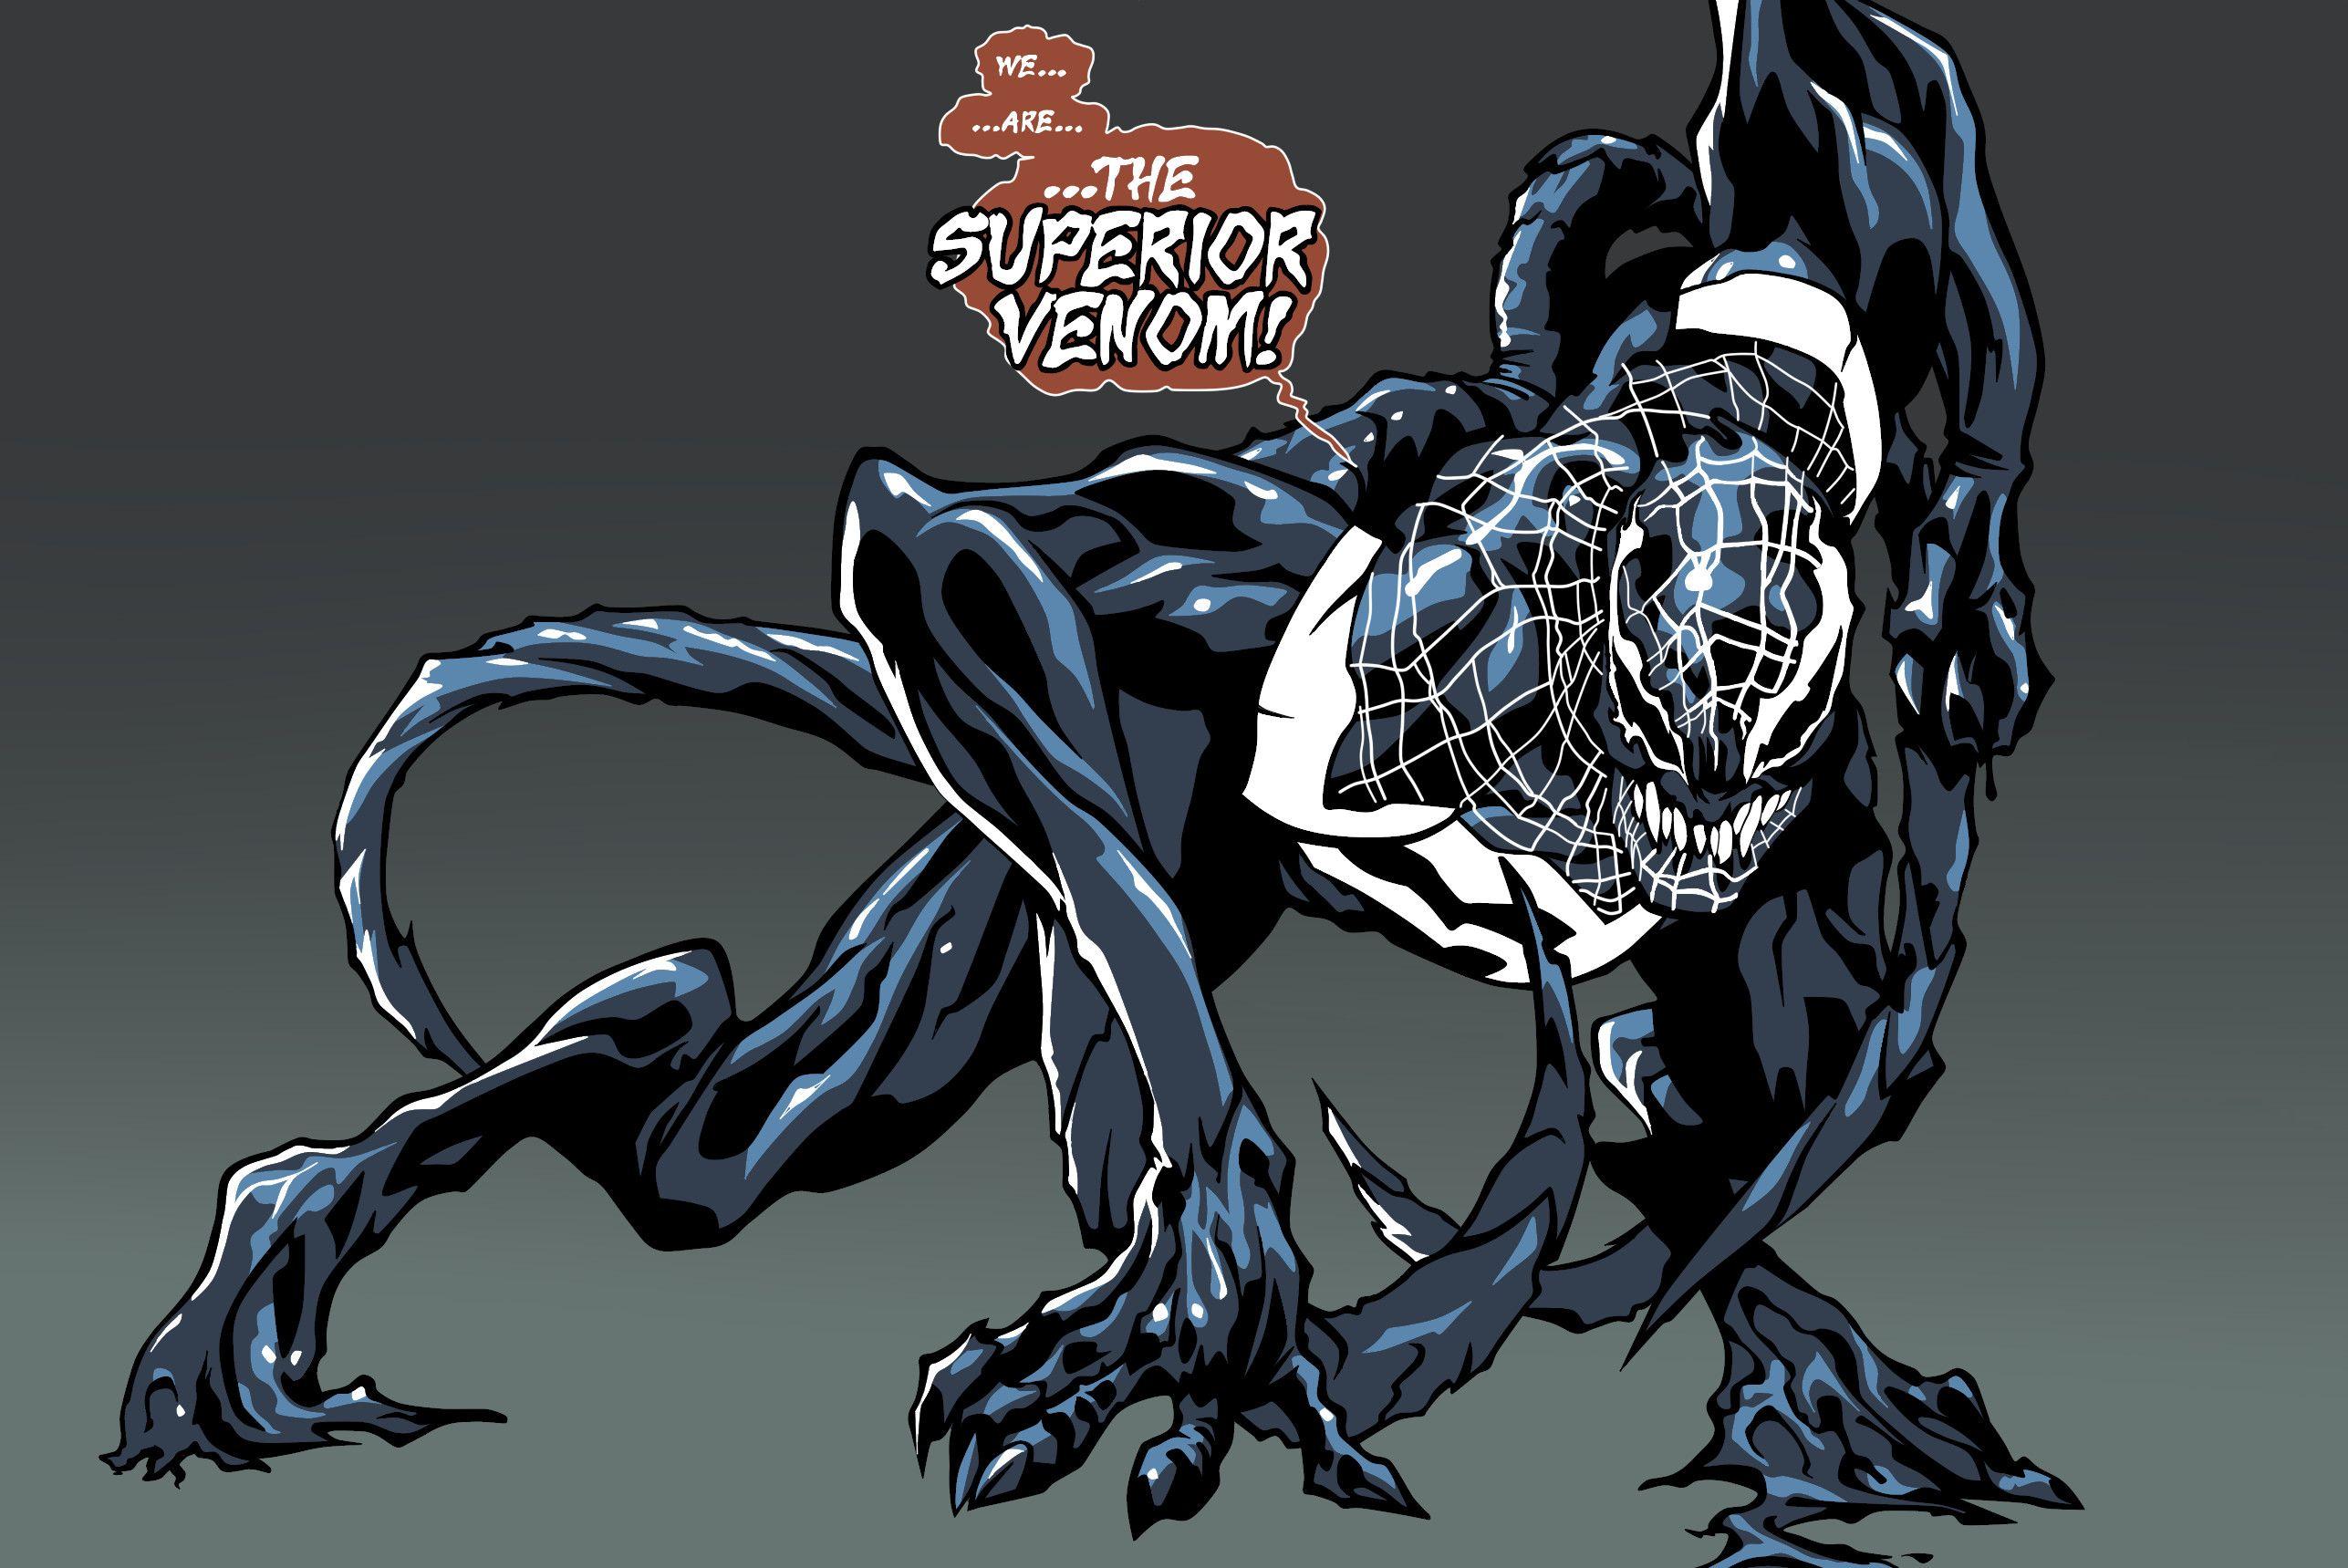 We Are Venom Wallpapers Top Free We Are Venom Backgrounds Images, Photos, Reviews